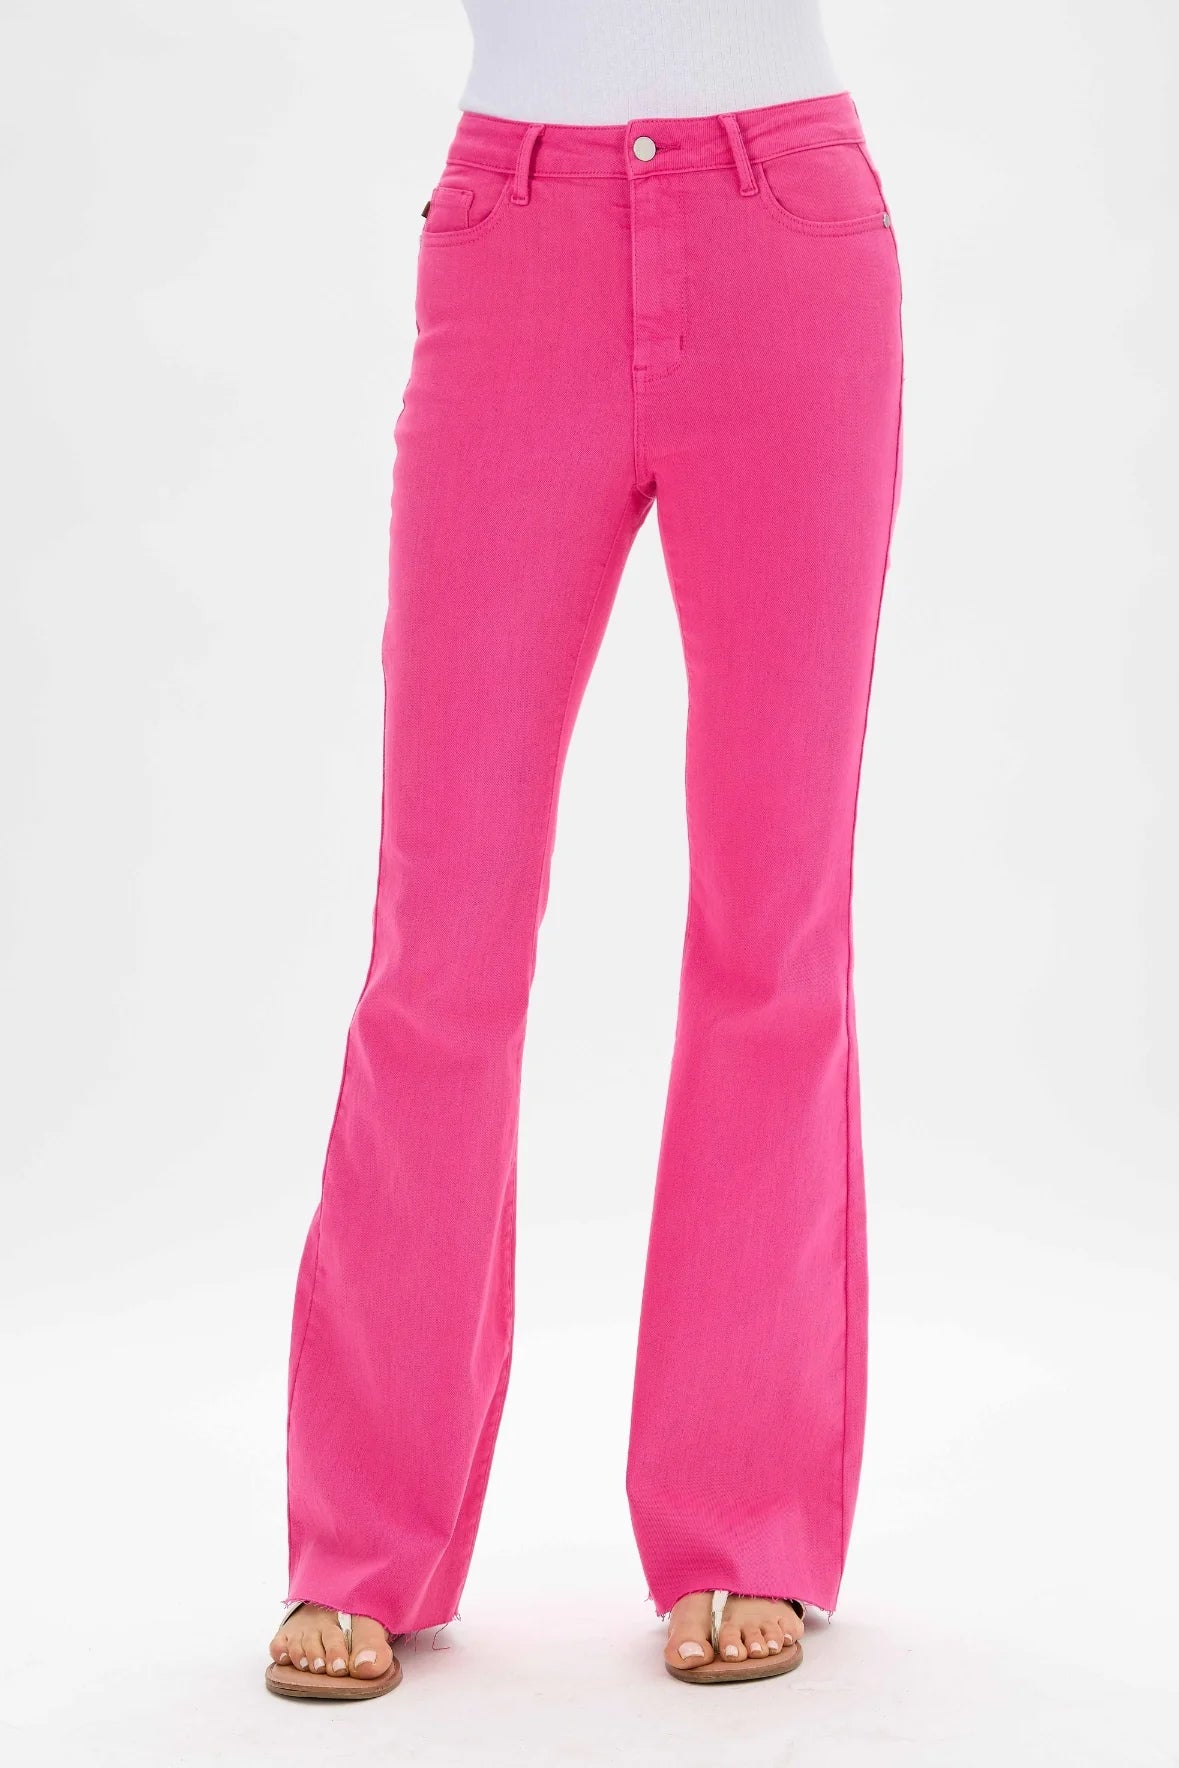 Judy Blue Margot Picture Perfect Pink Flare Jean